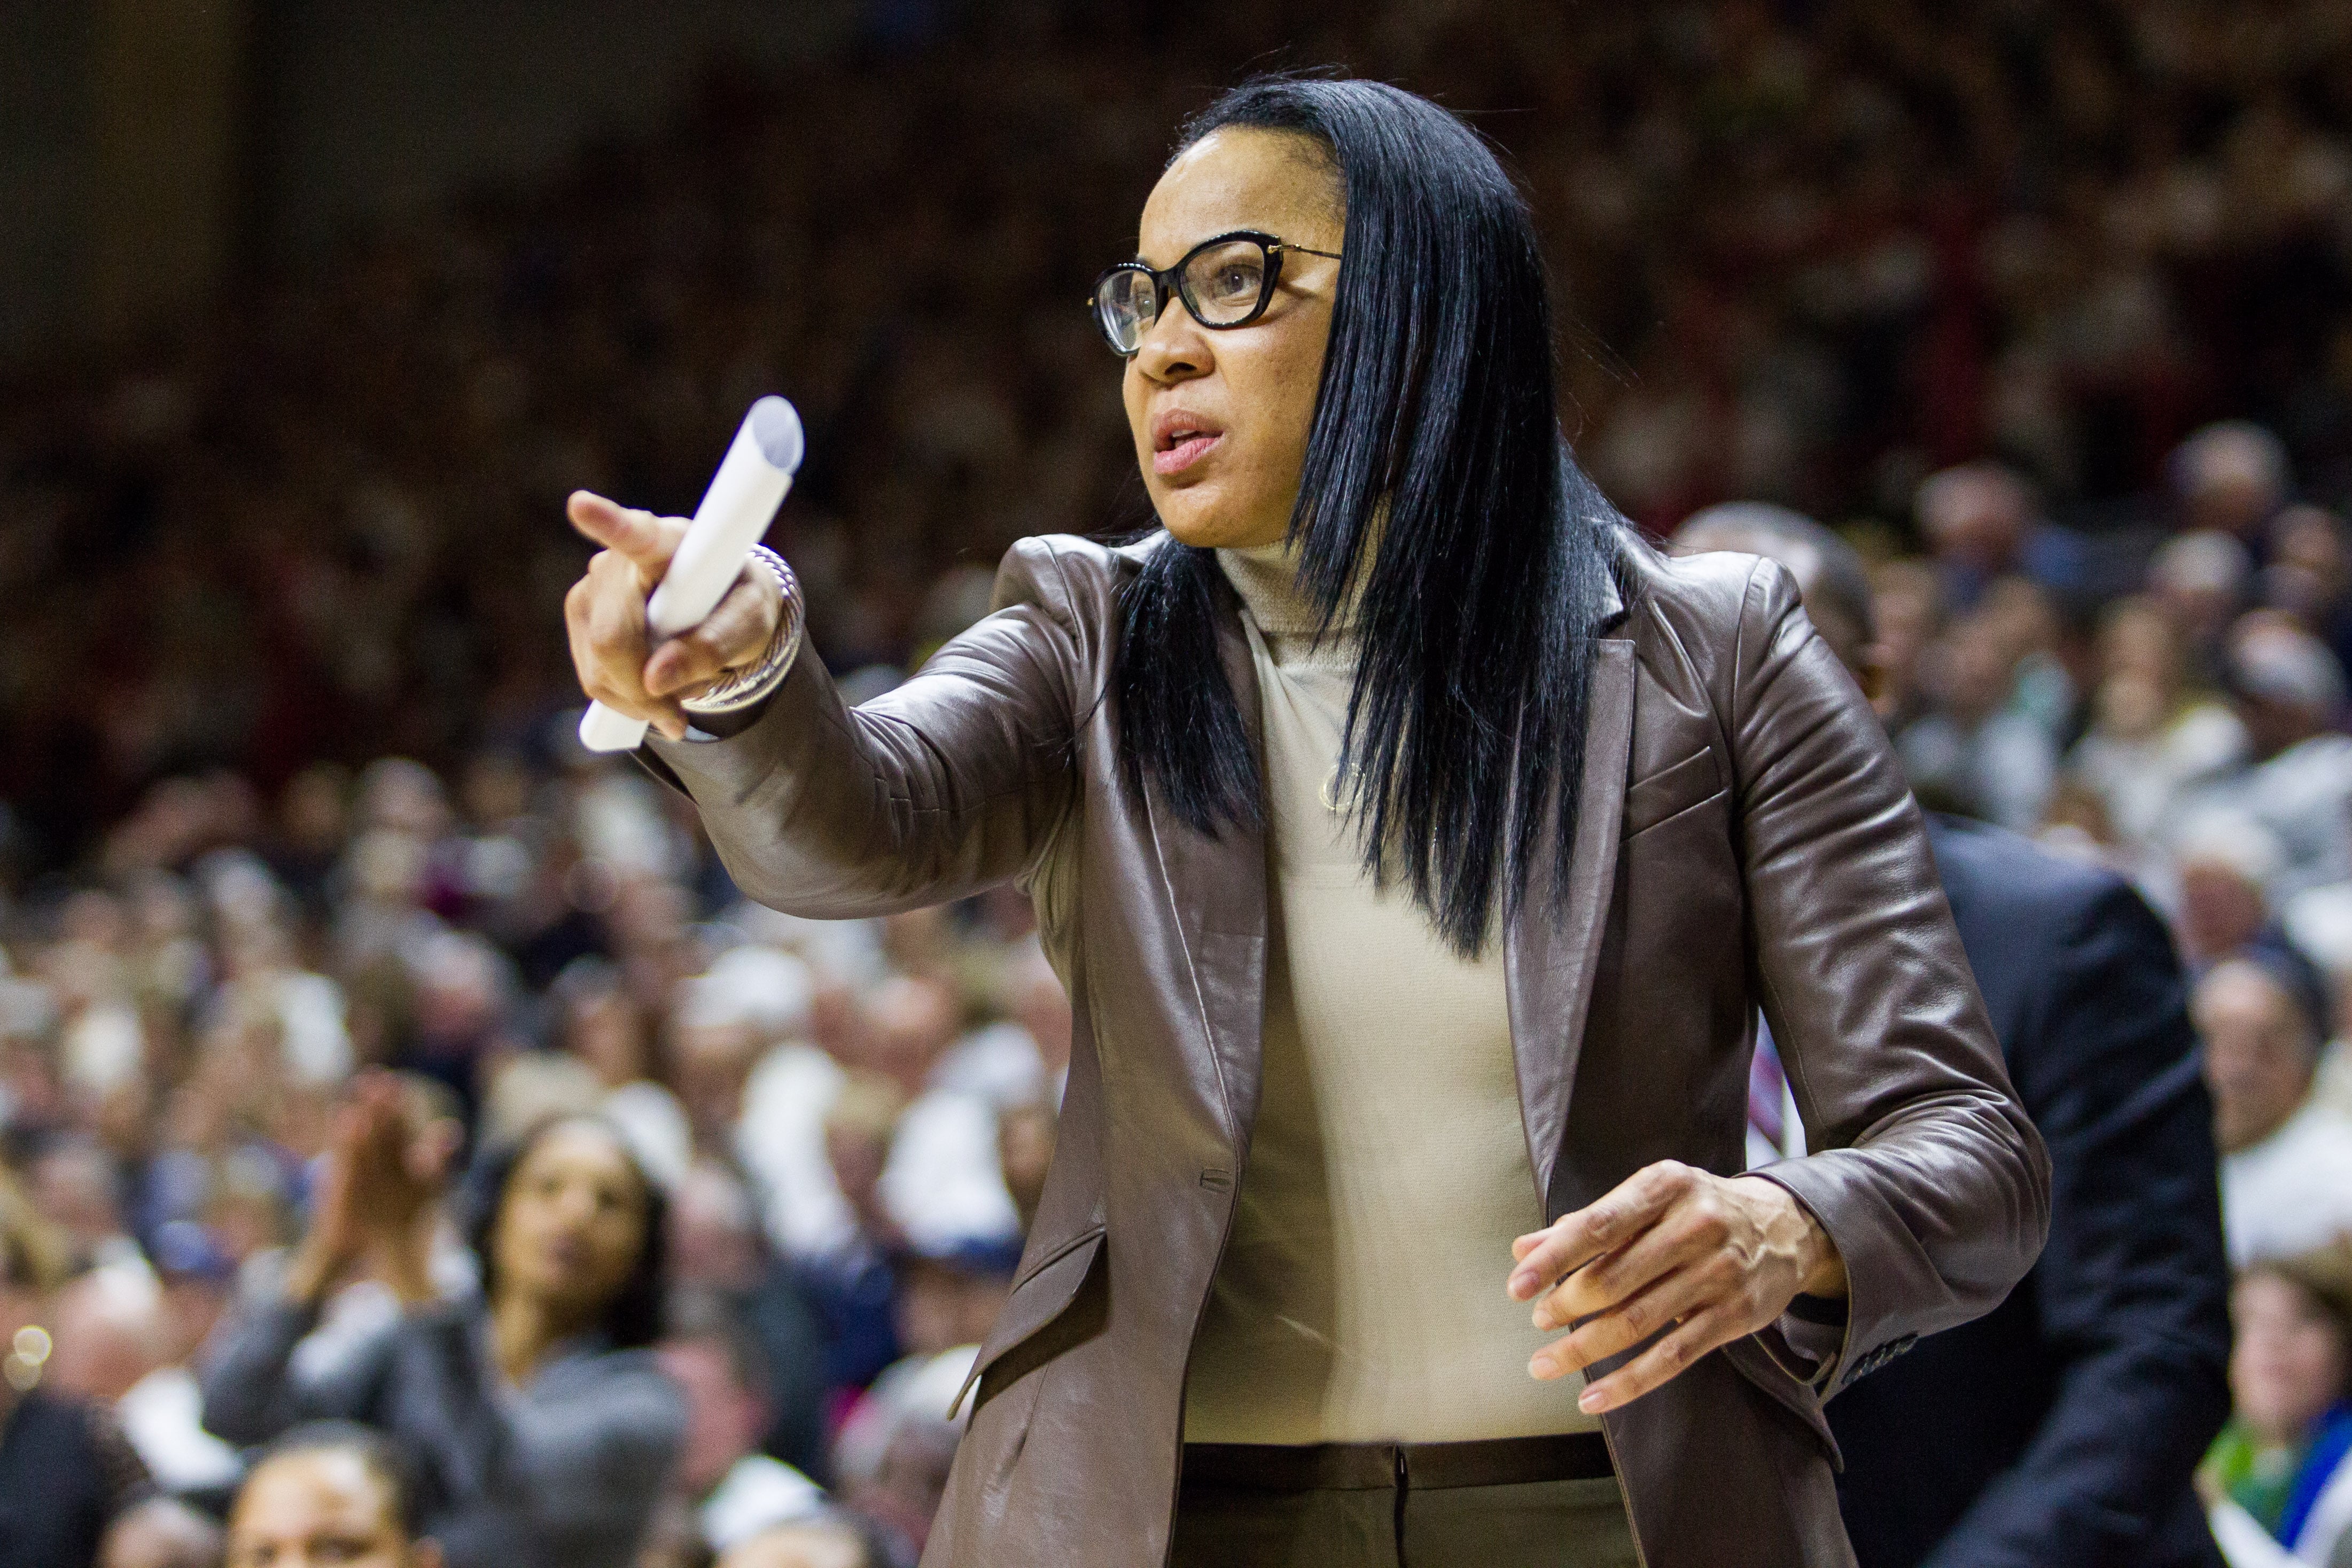 Will Dawn Staley Coach Basketball at the Tokyo Olympics?